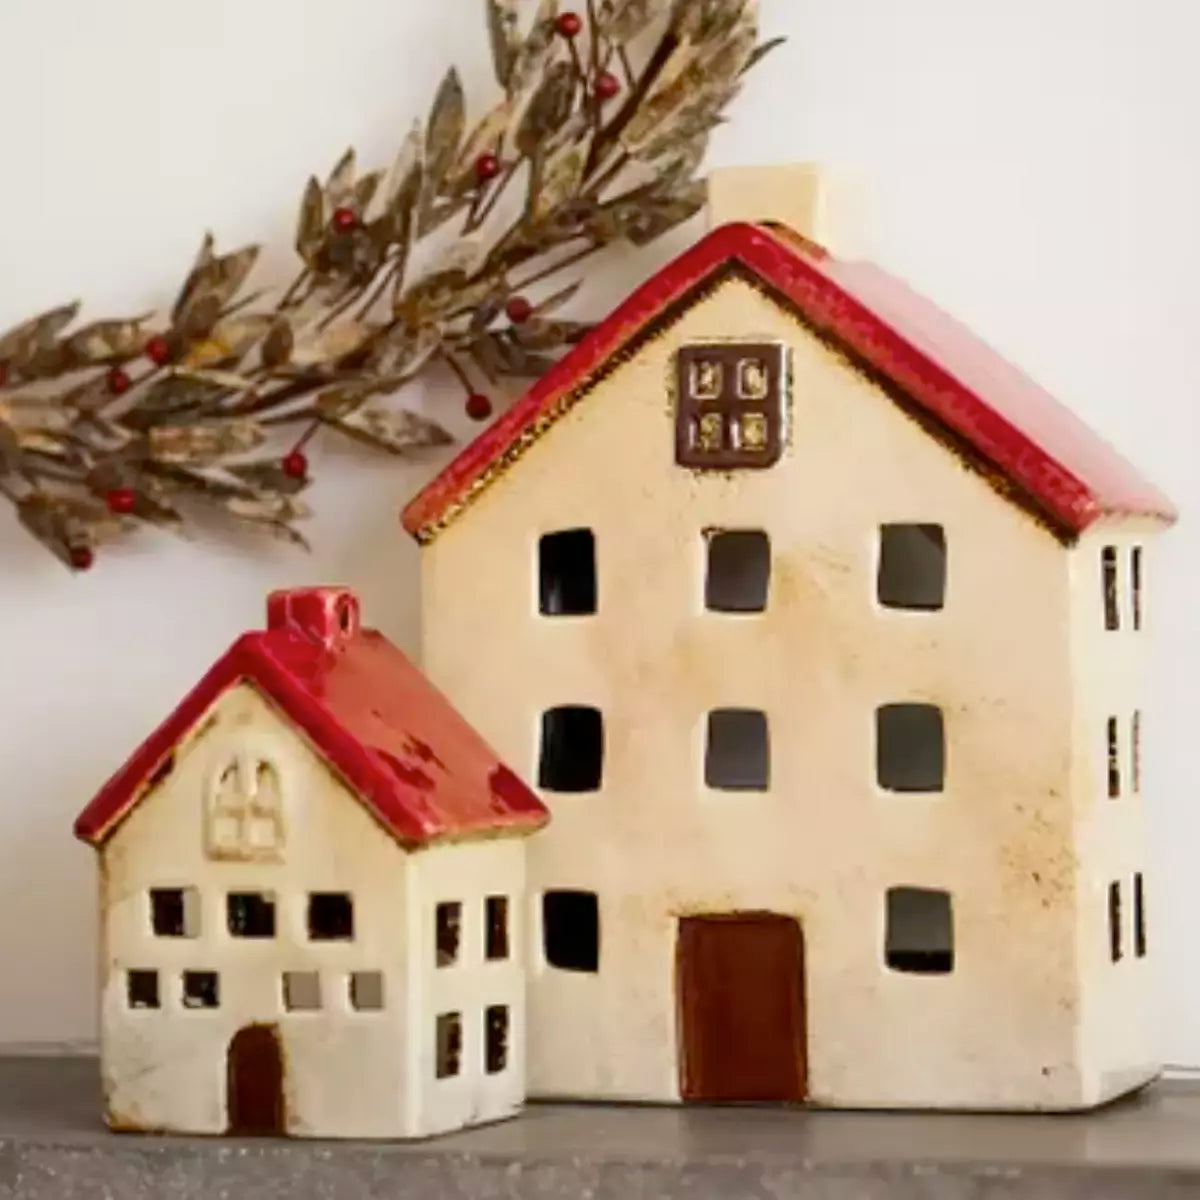 Two French Country Collections Christmas Village Villa ceramic house figurines on a mantle.